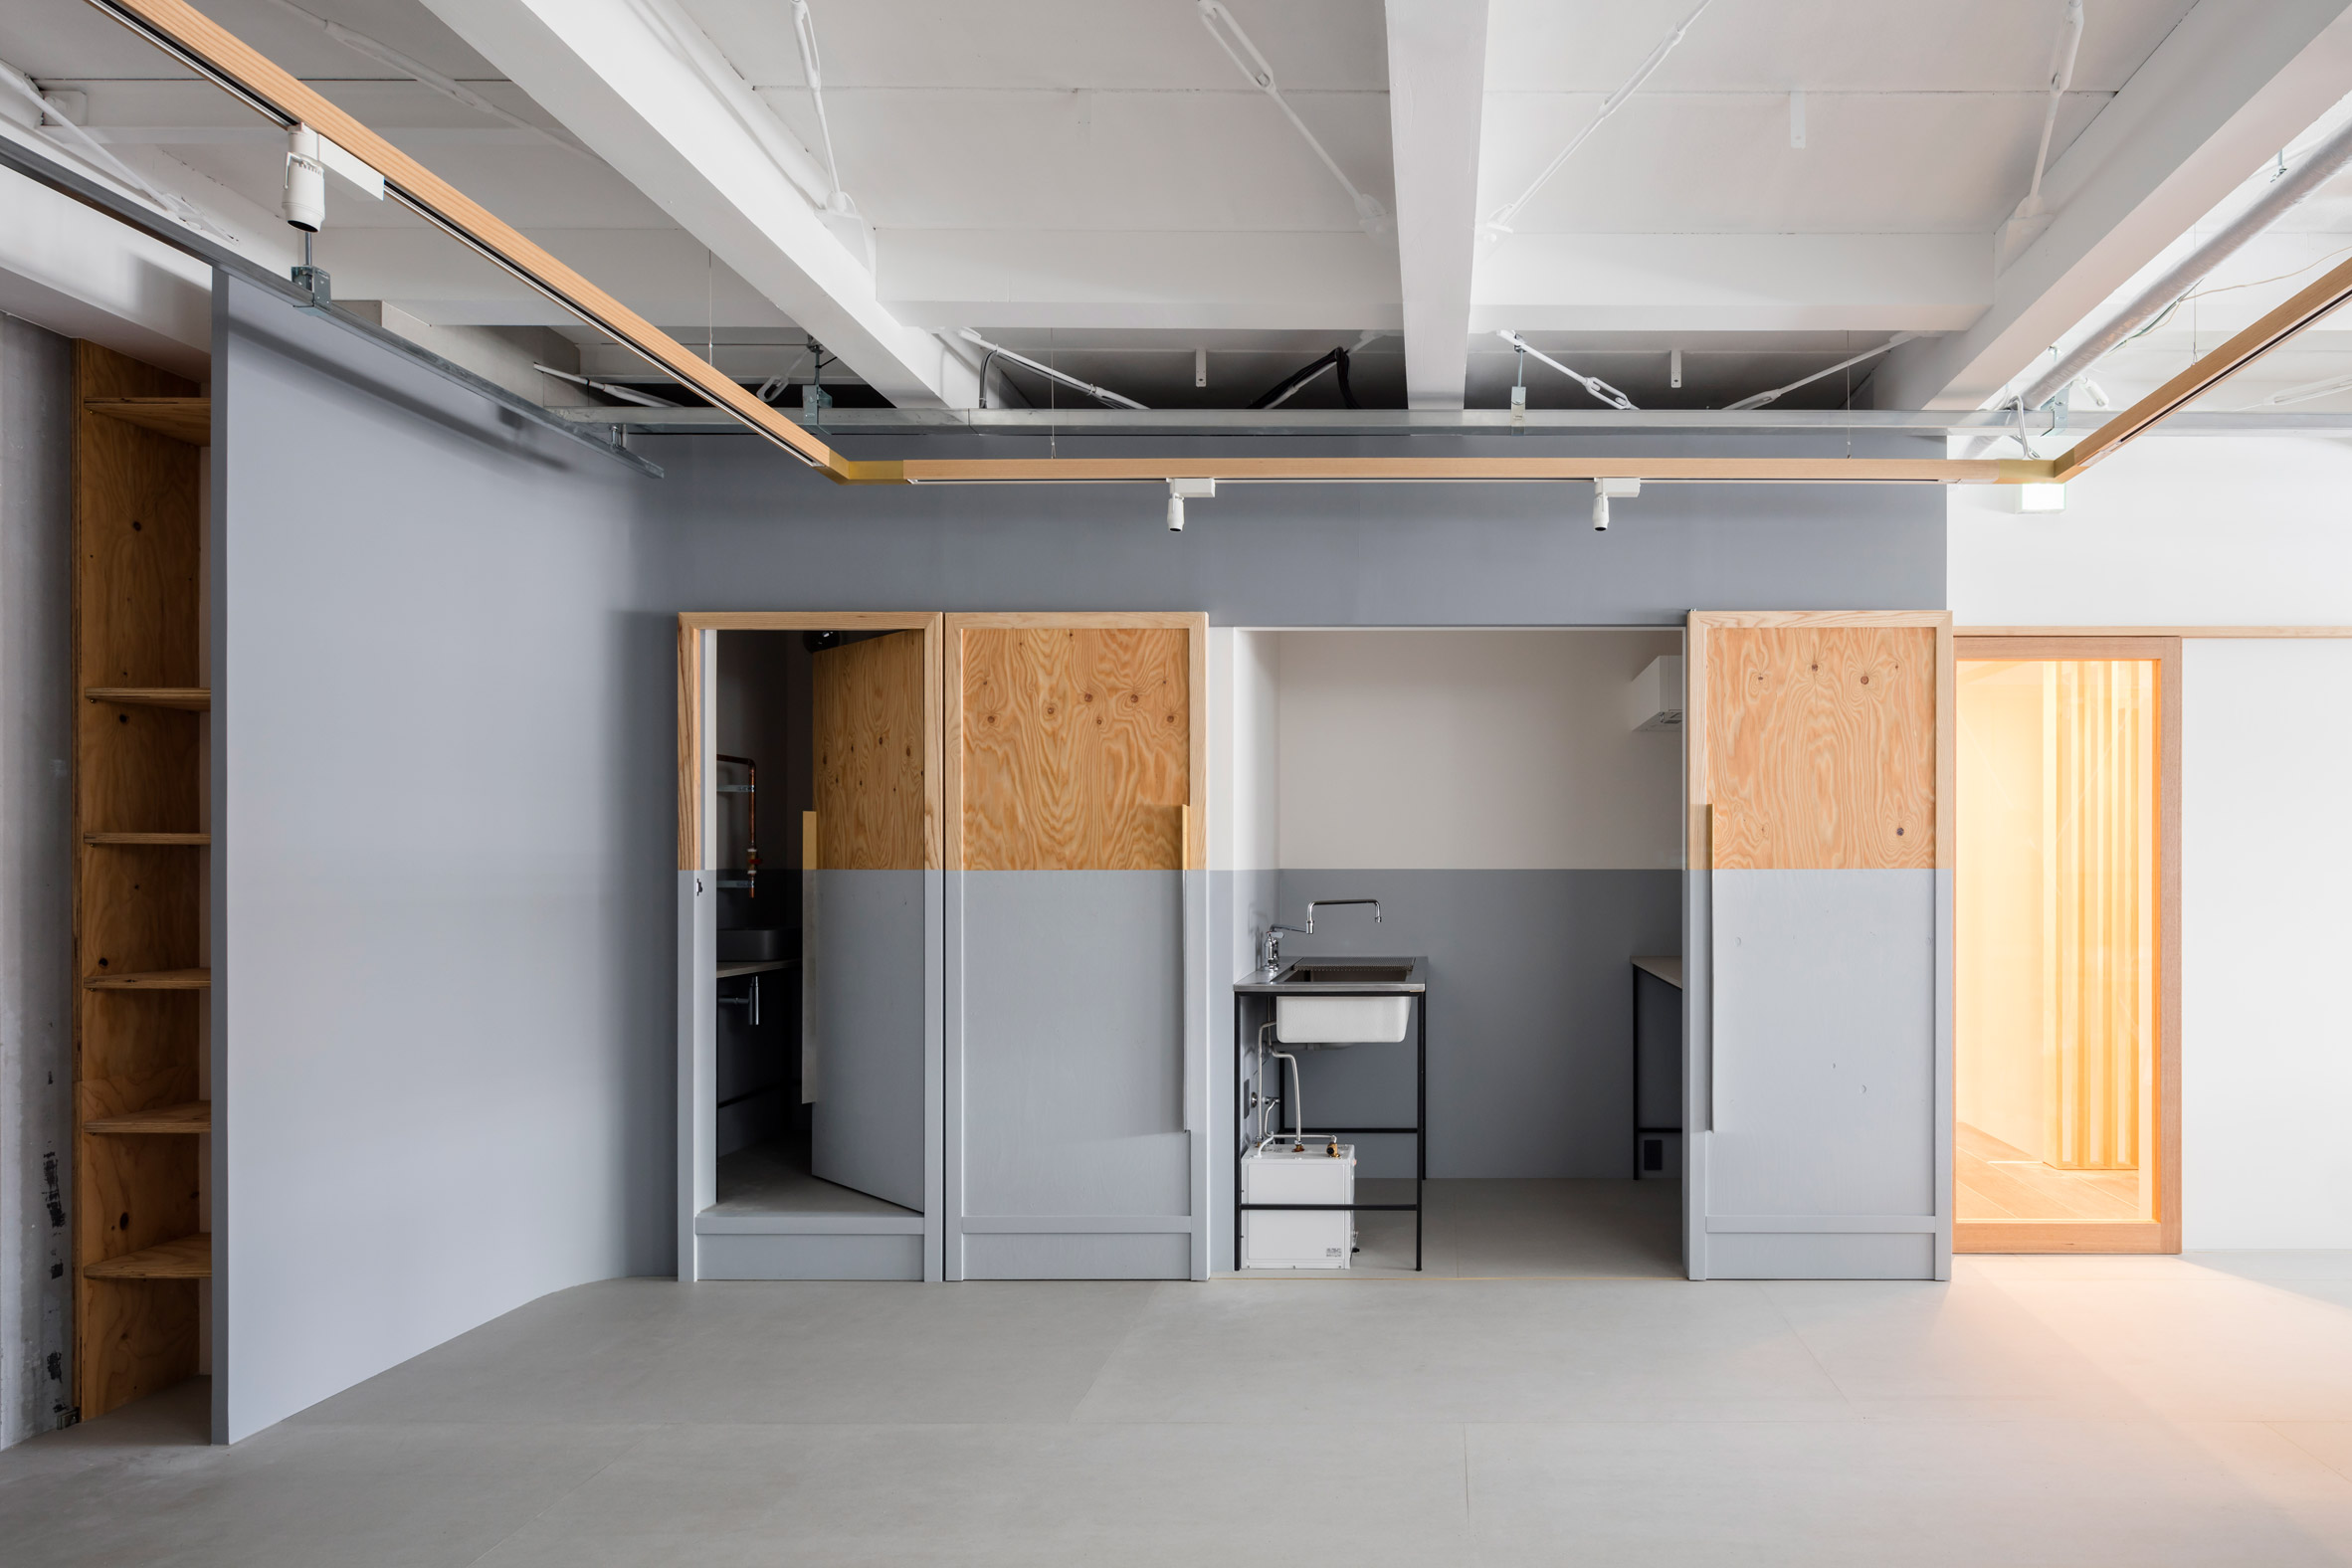 Partition wall in Panda minimal office by Shimpei Oda Architect Office and Atelier Loowe